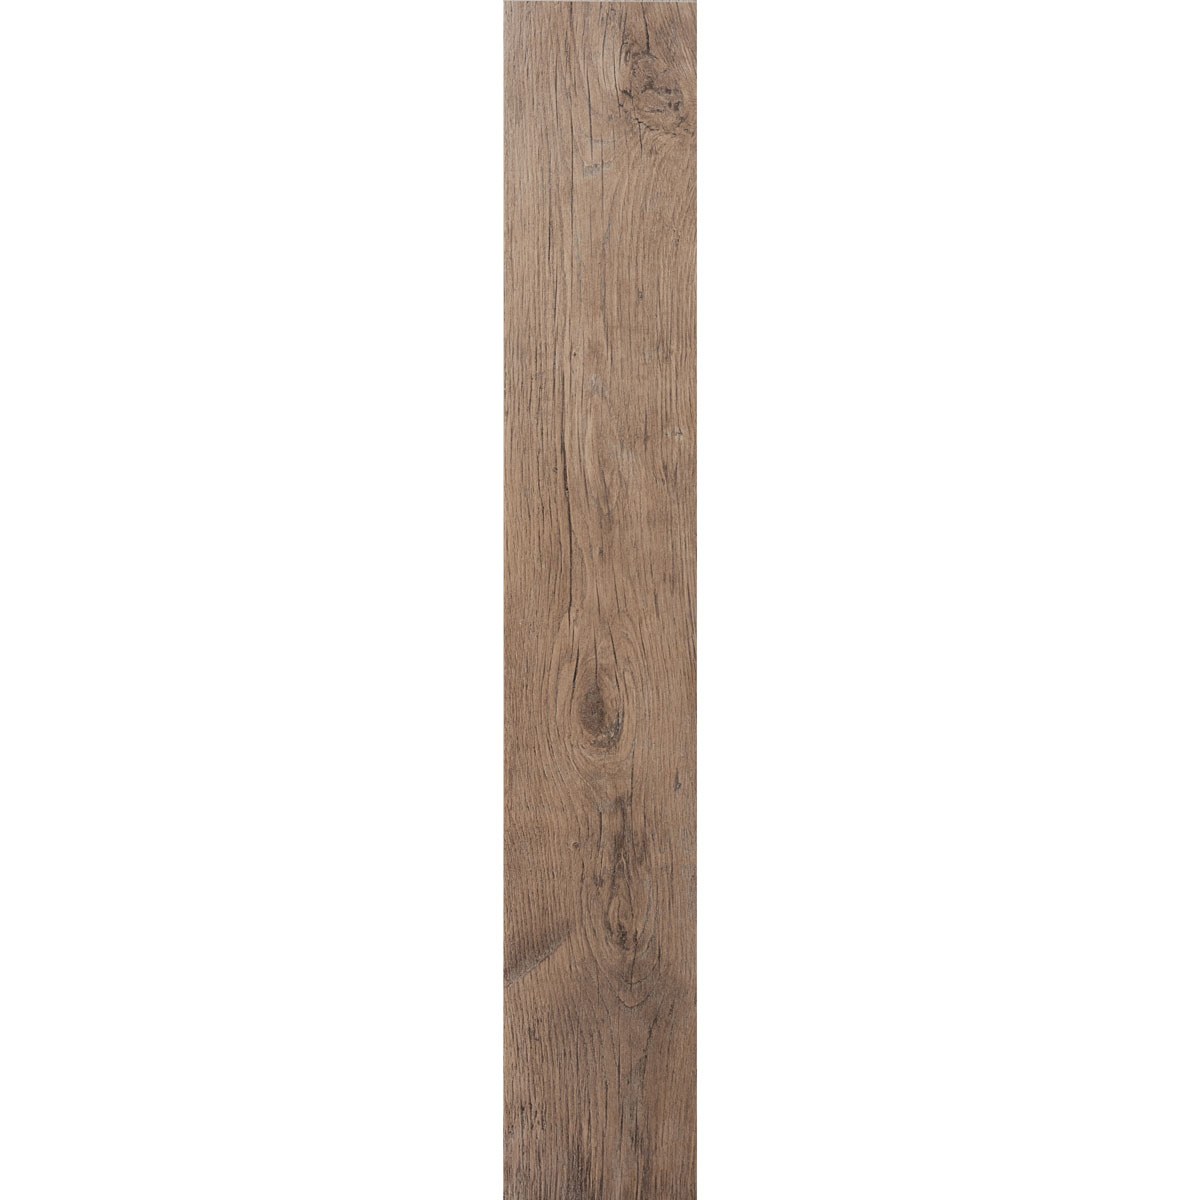 Weathered Oak Biscuit Plank, product variant image